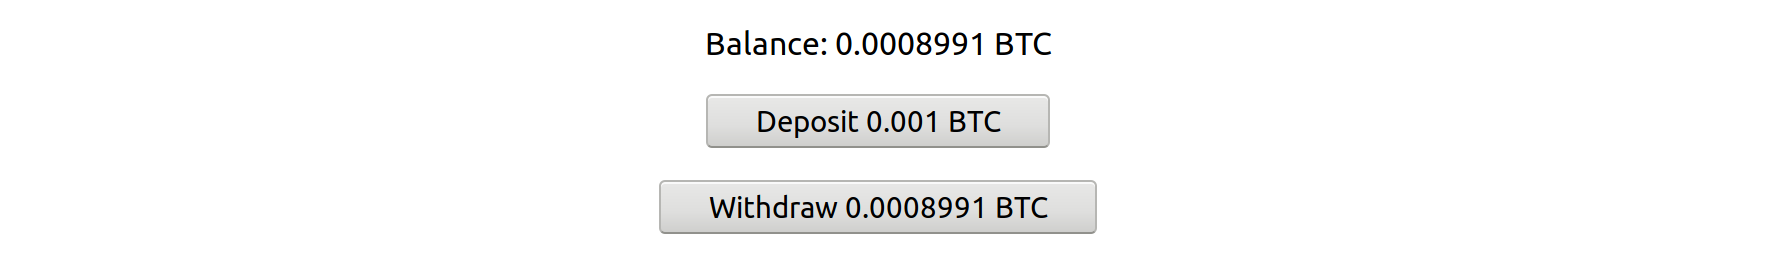 After depositing some BTC into our Ethereum contract